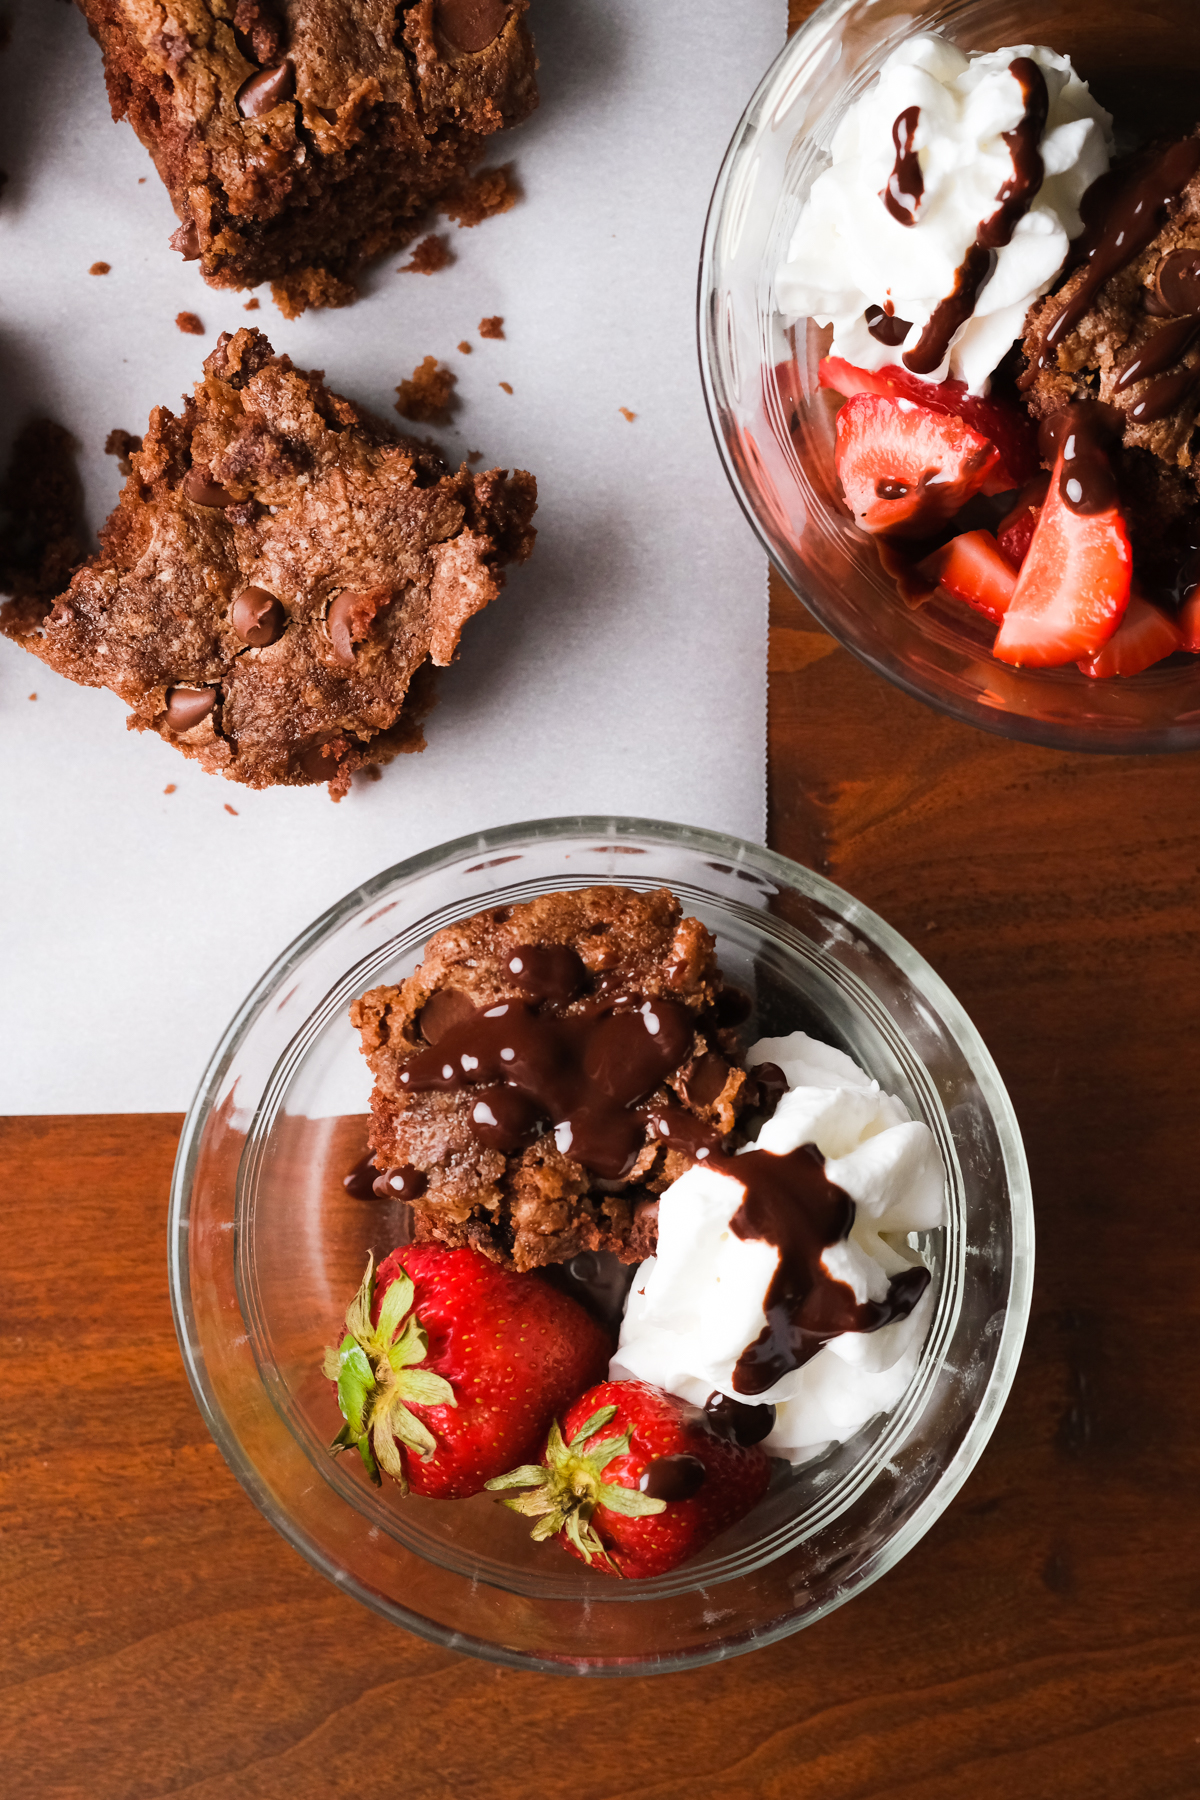 zucchini brownie in a bowl with whipped cream strawberries and chocolate sauce